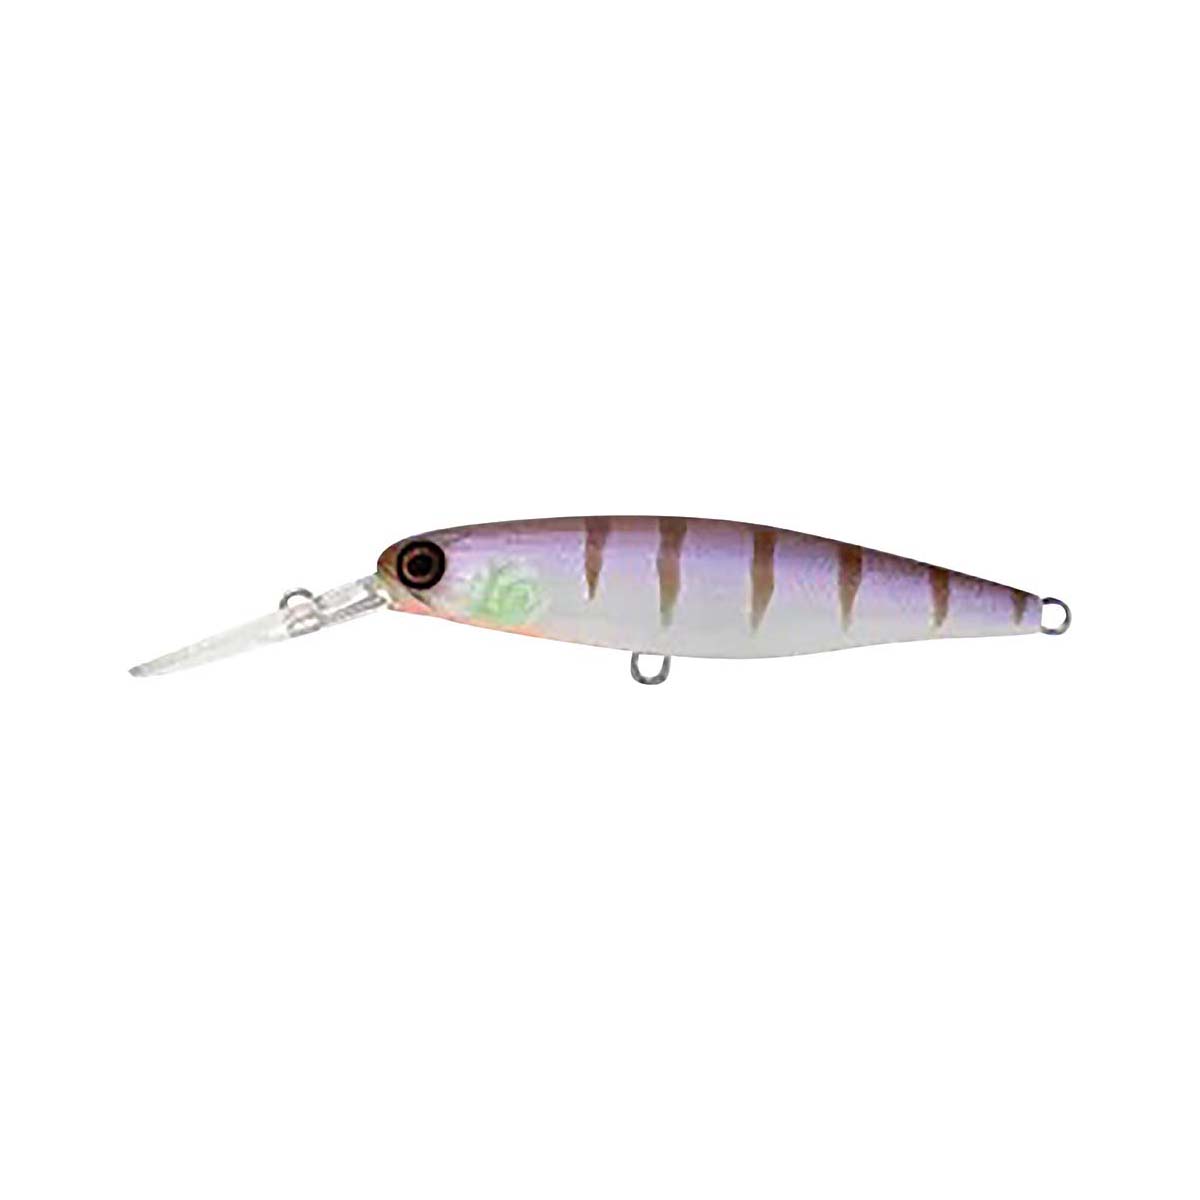 Jackall Squirrel SNT Hard Body Lure 67mm Purple Gill